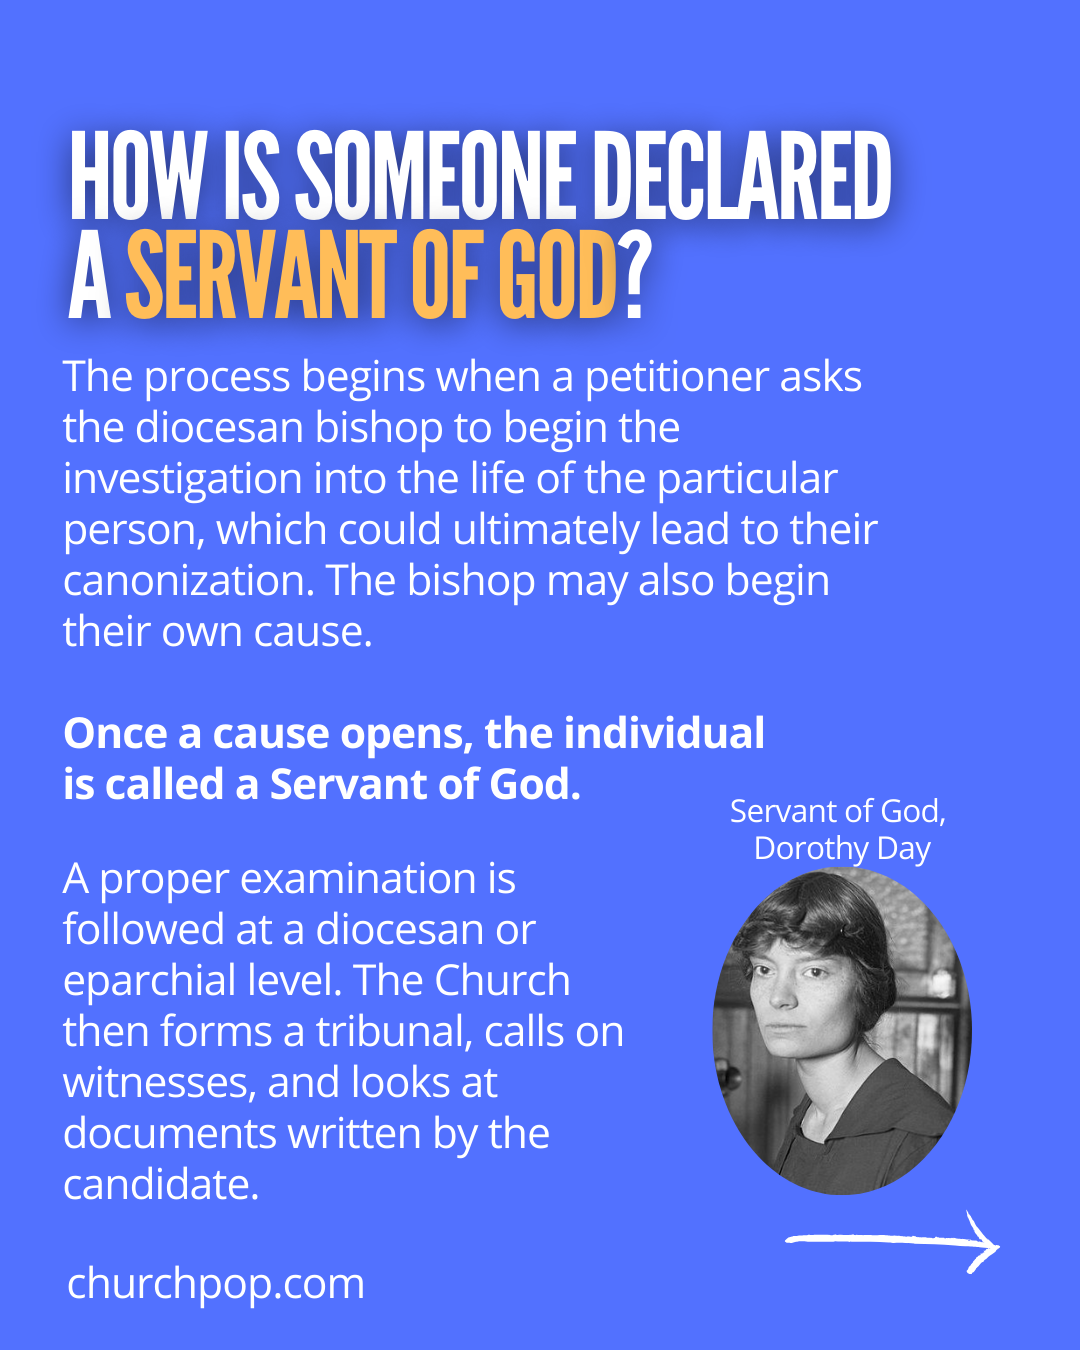 How is someone declared a Servant of God?